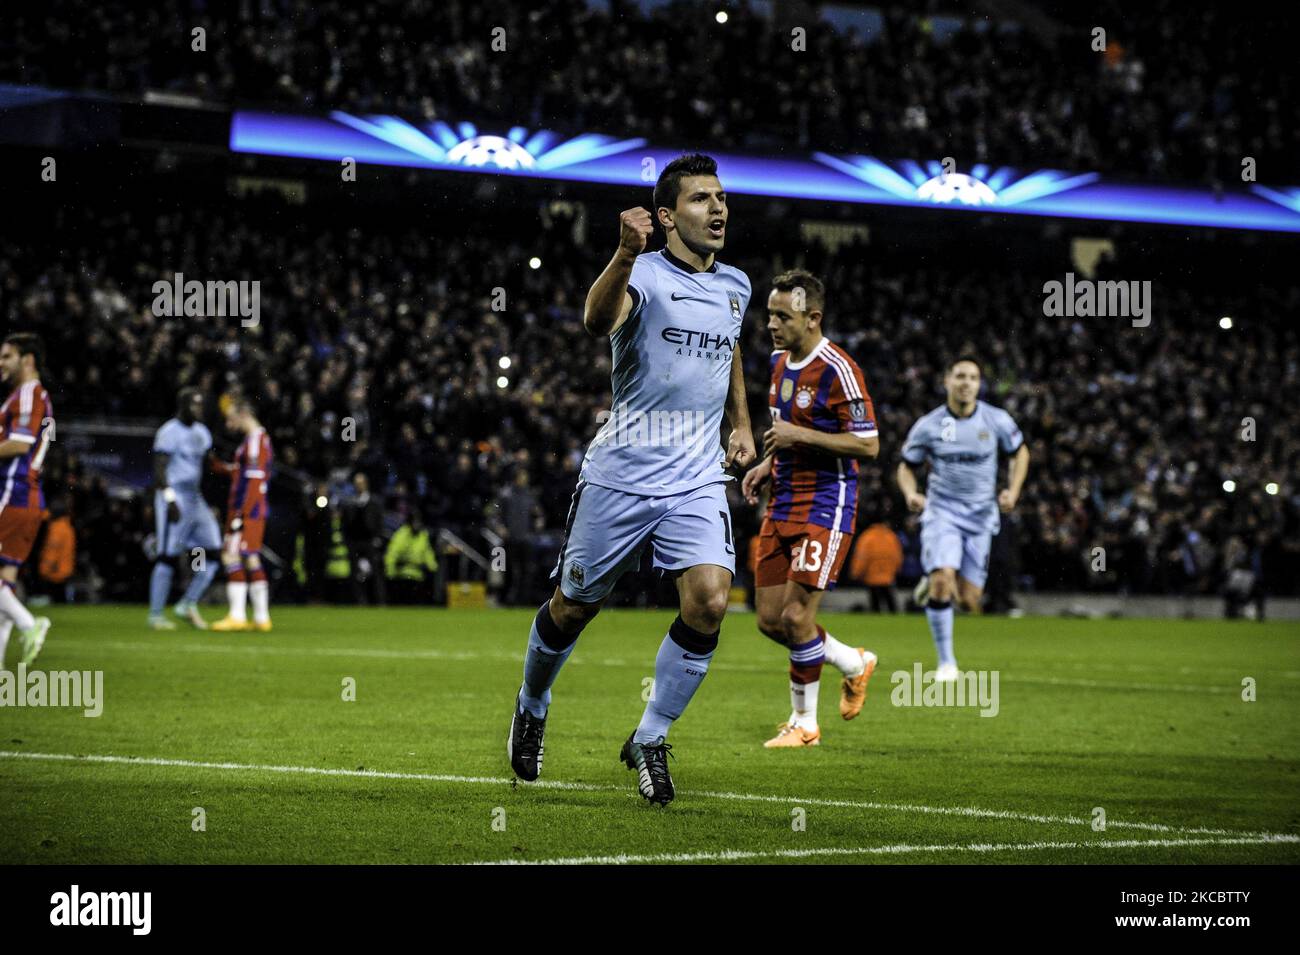 Man City forward Sergio Aguero celebrates opening the scoring during the UEFA Champions League, Group E match between Manchester City & Bayern Munich at the Etihad Stadium in Manchester on Wednesday November 25th 2014. (Photo by MI News/NurPhoto) Stock Photo